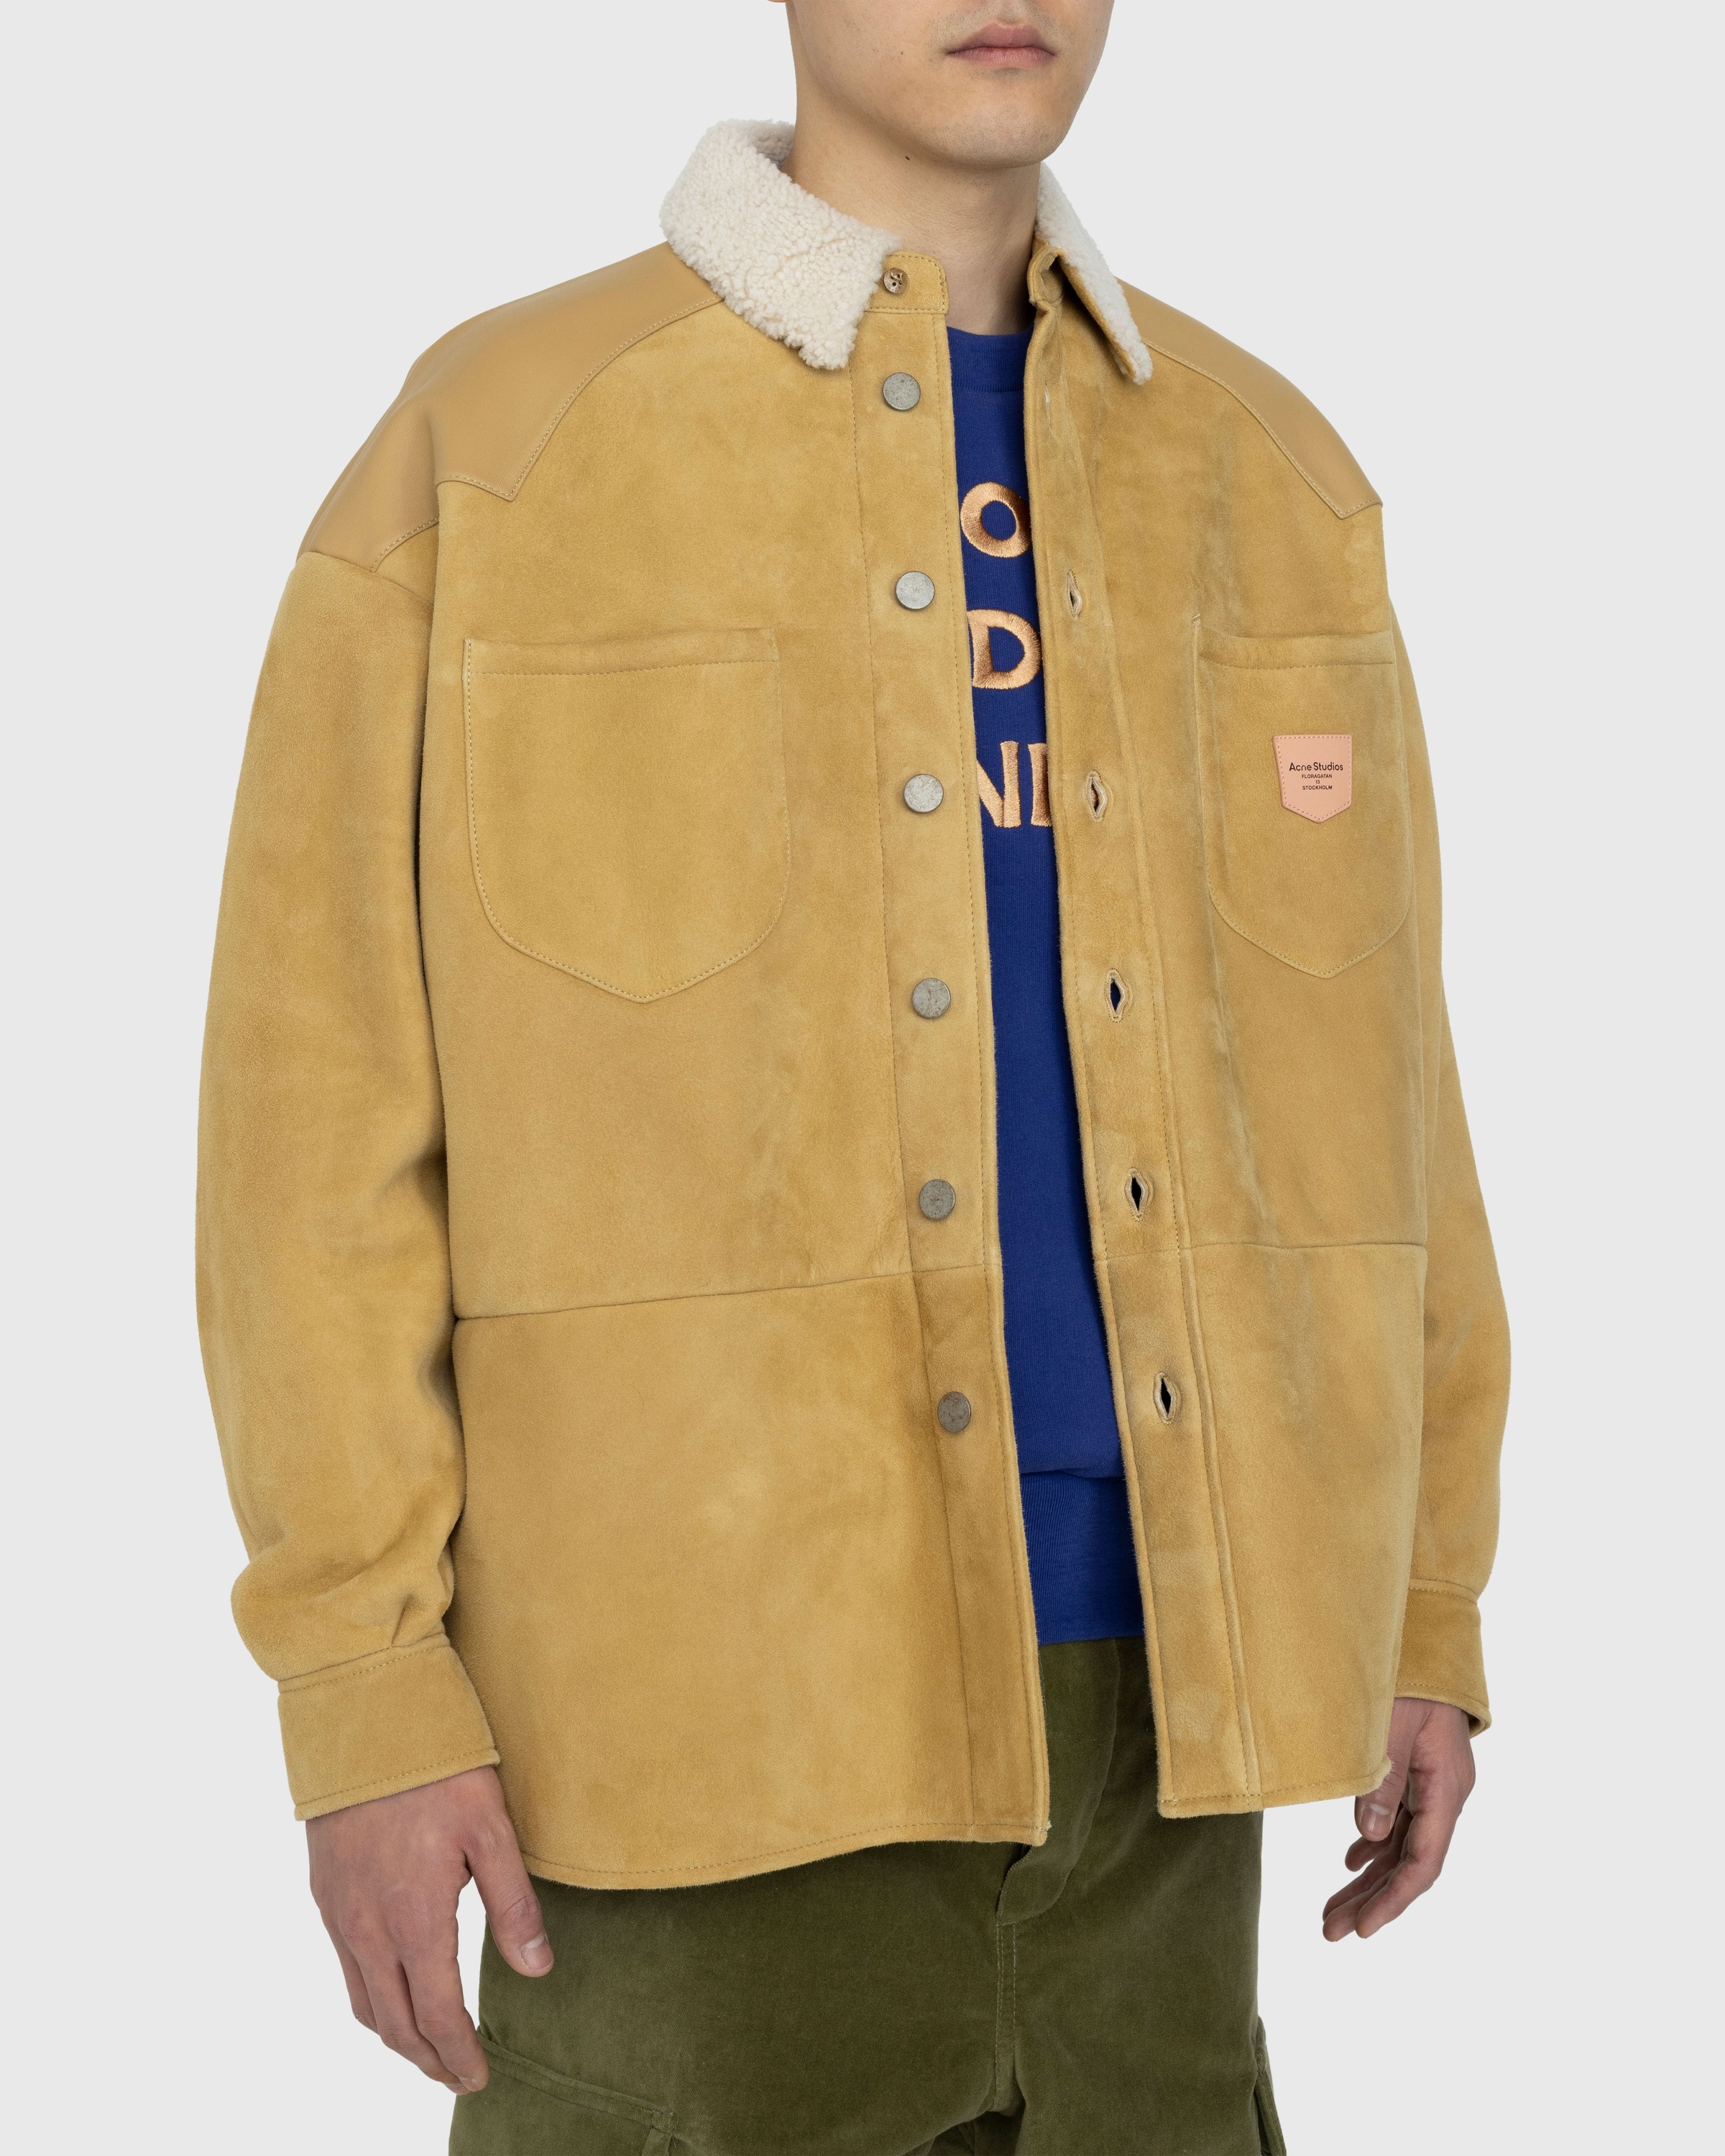 Acne Studios – Suede Leather Shearling Overshirt Straw Yellow - Fur & Shearling - Yellow - Image 3